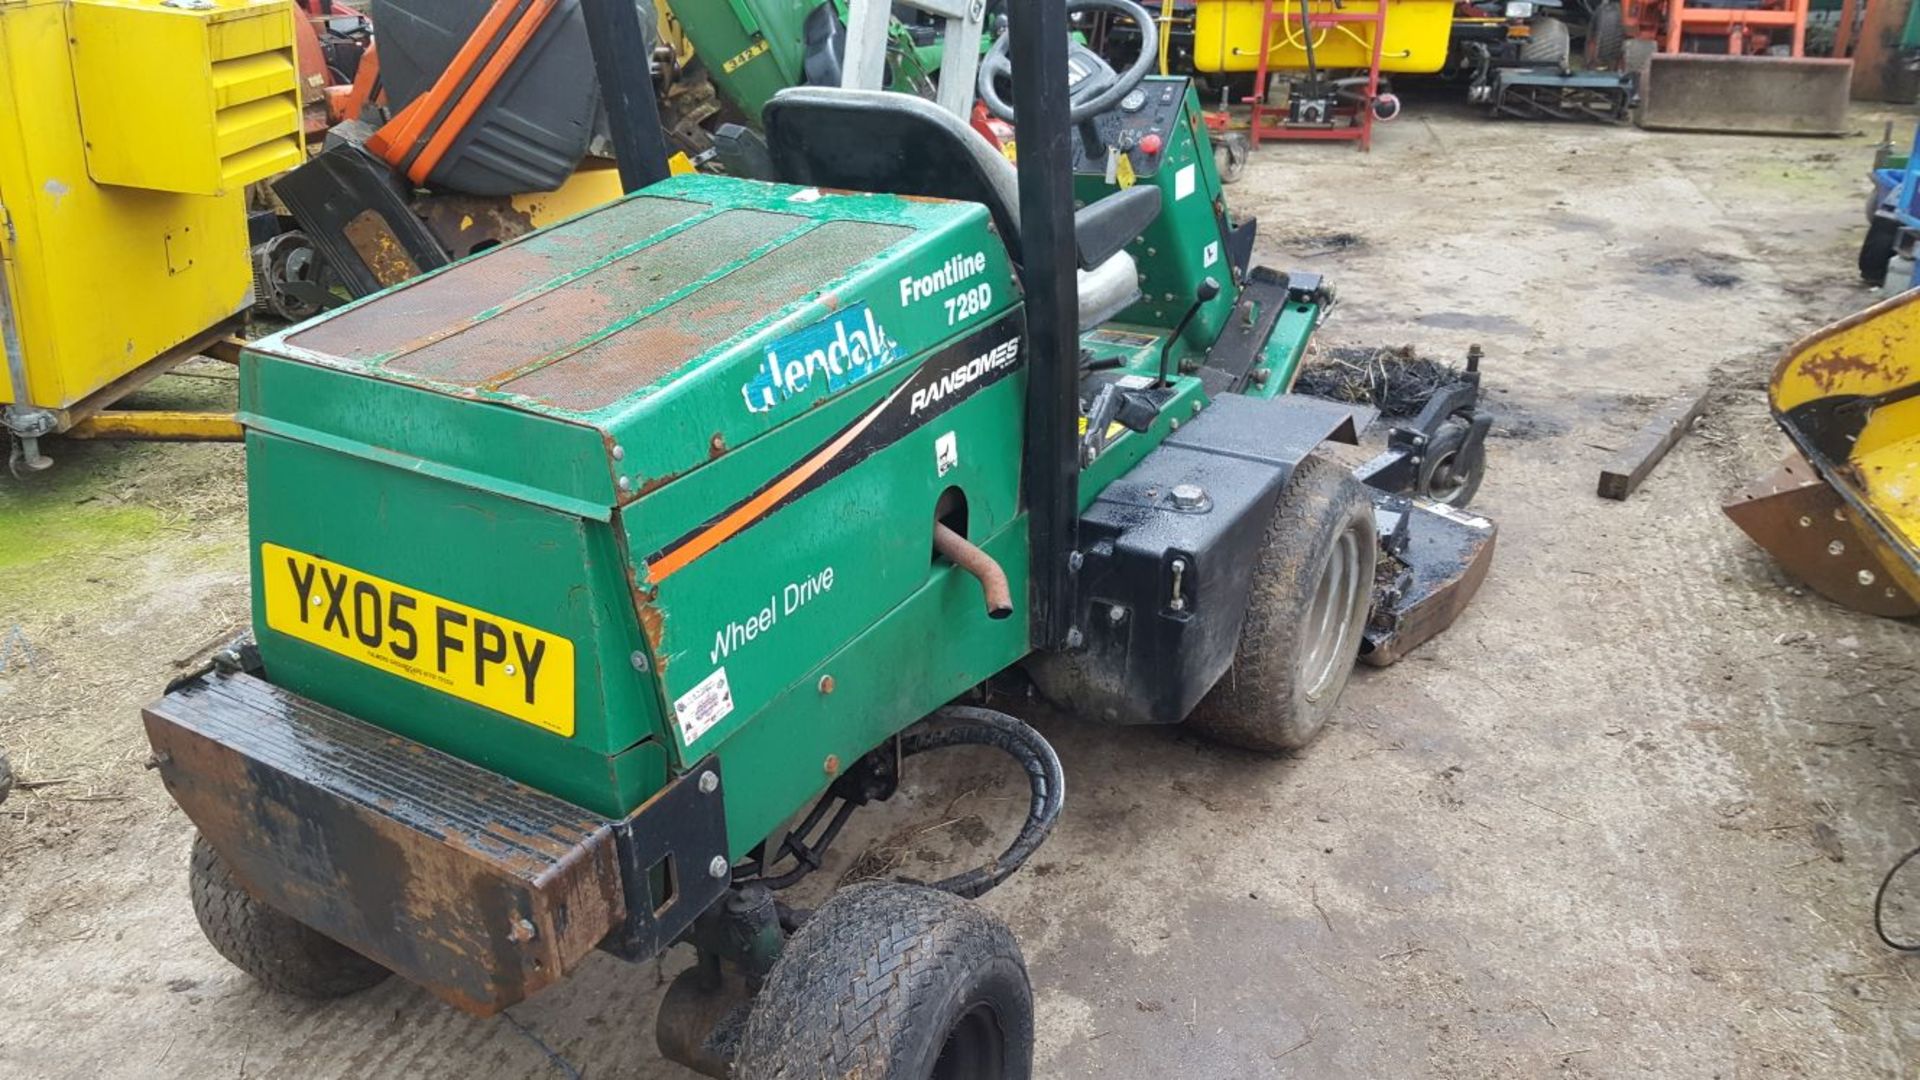 2005/05 REG RANSOMES ROTARY MOWER 4WD FRONTLINE 728D, STARTS, DRIVES AND MOWS *PLUS VAT* - Image 3 of 7